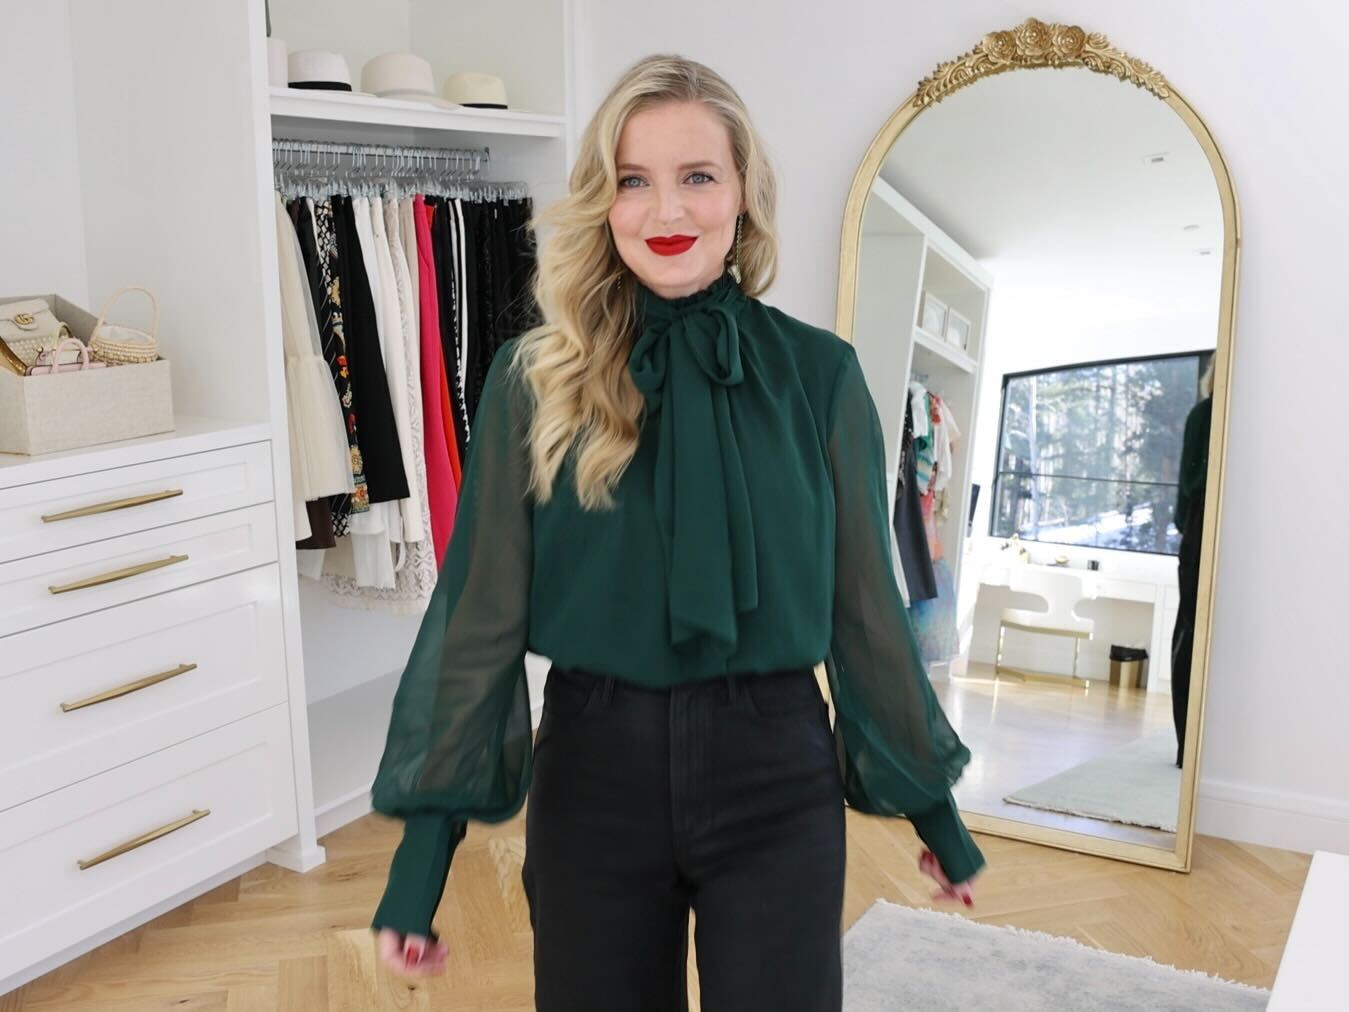 Jeans + Sheer Top | How To Dress Up Jeans For A Holiday Party